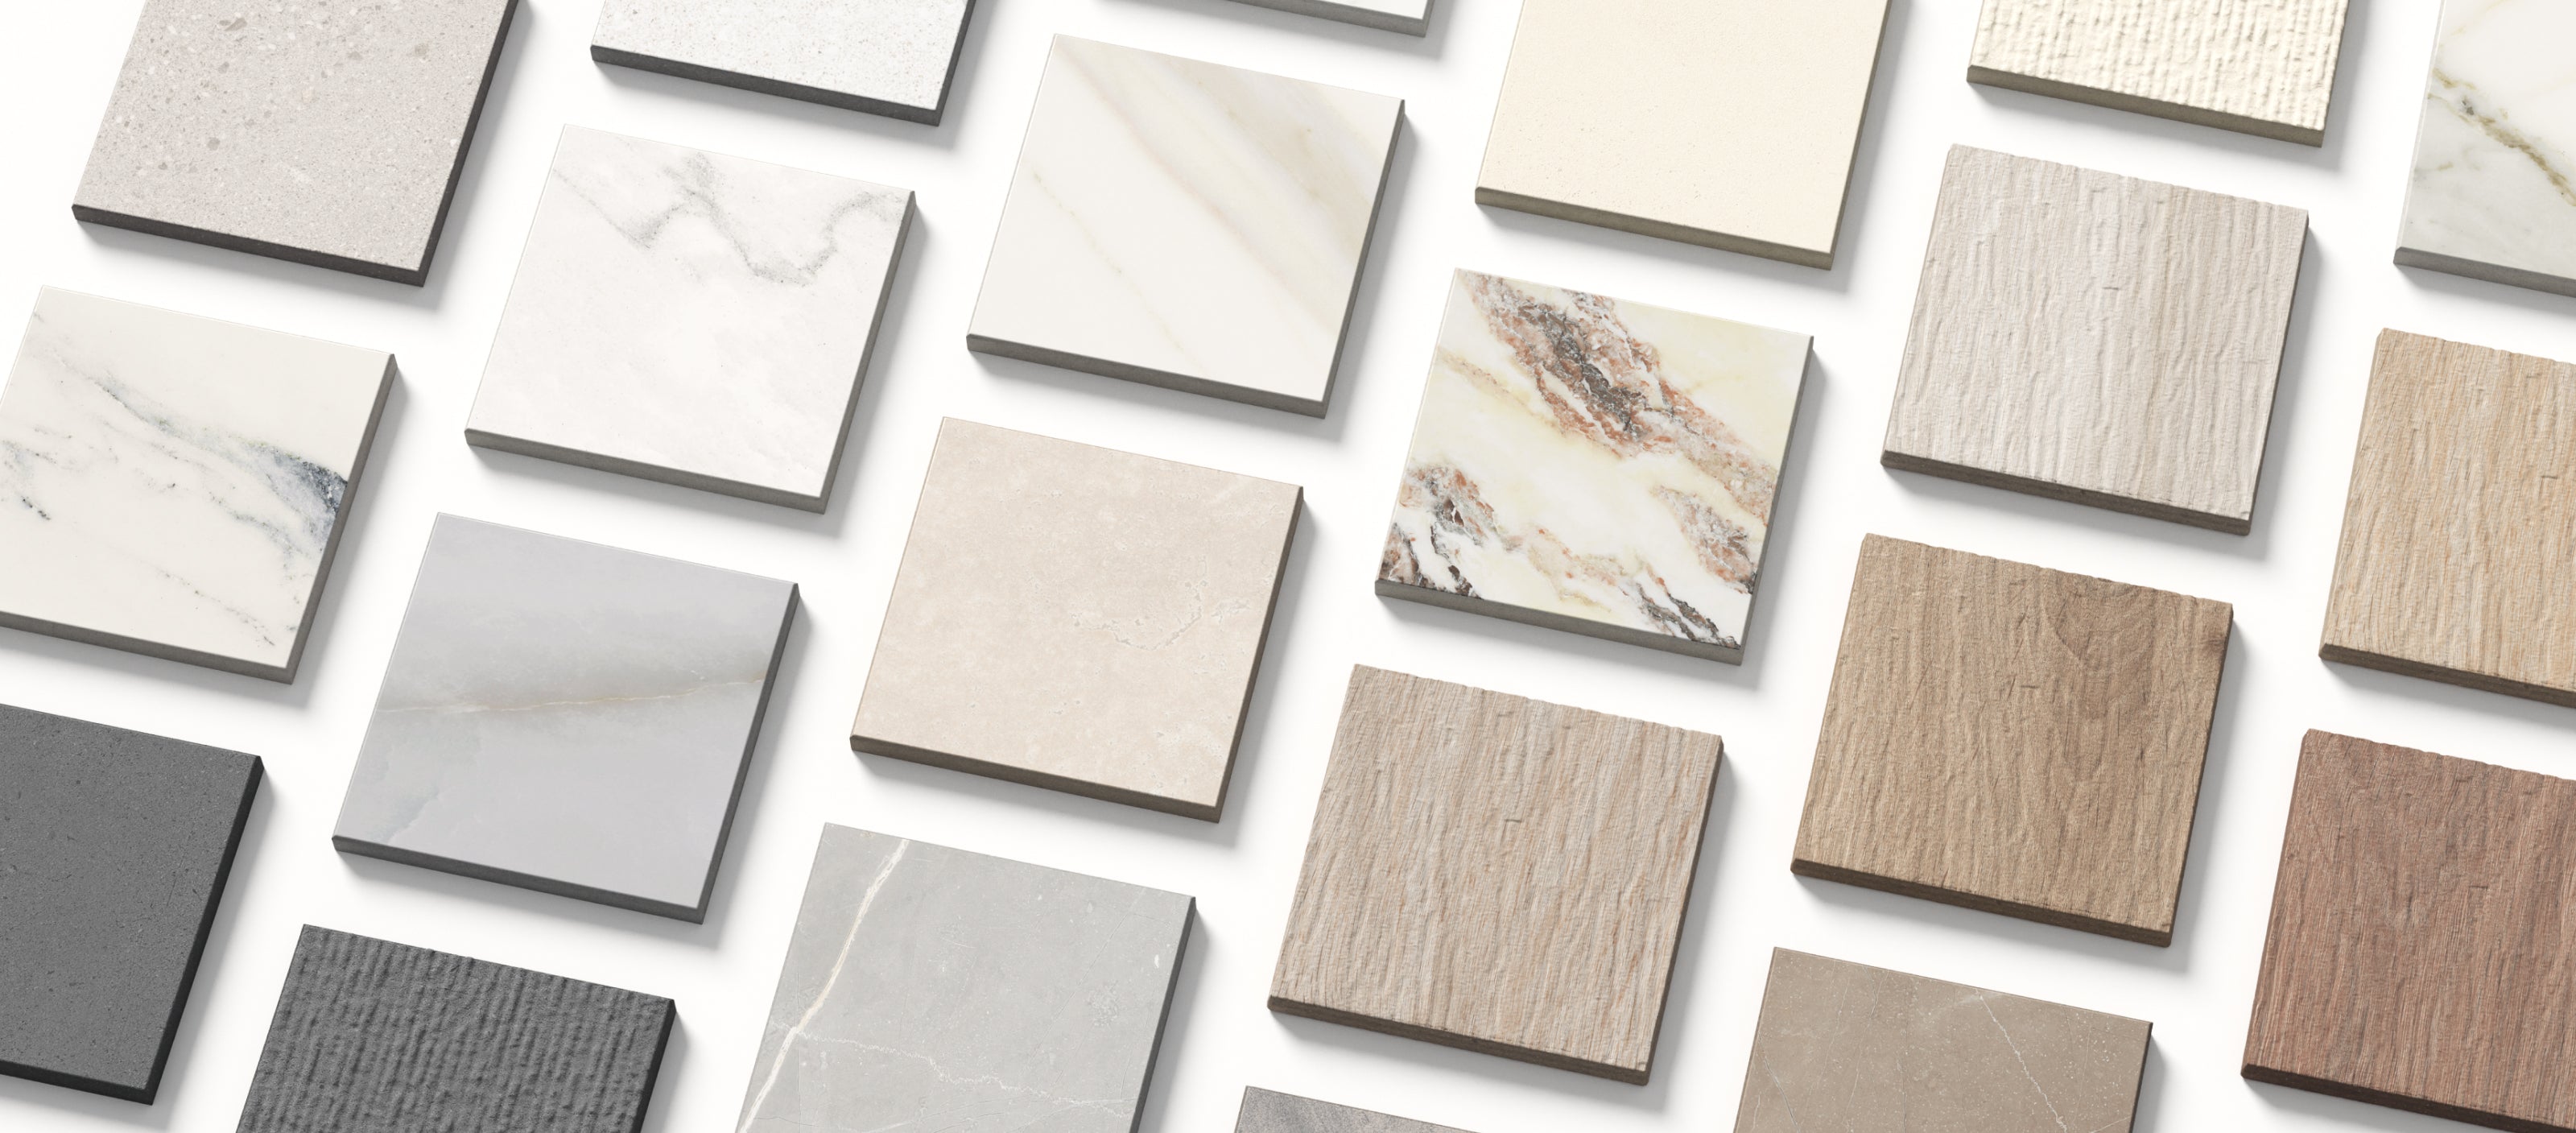 An expansive display of tile samples, highlighting the rich variety available for your design projects.